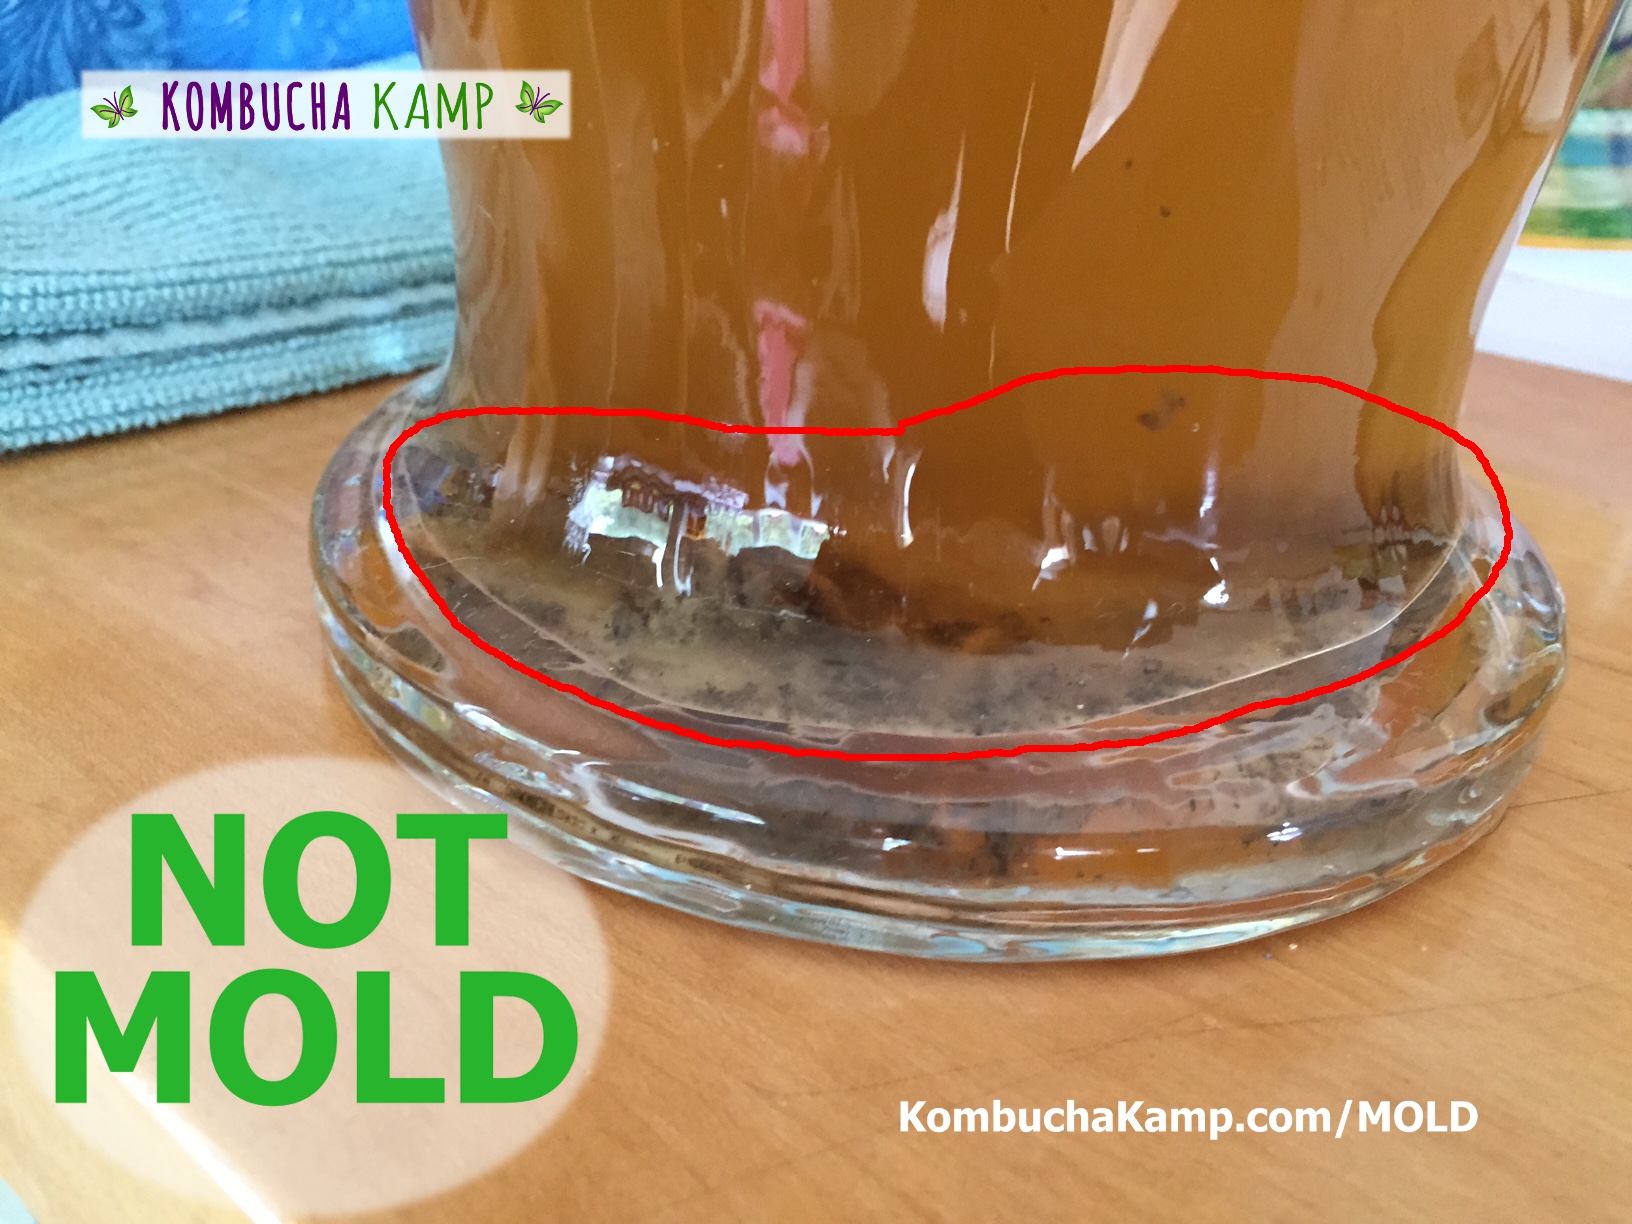 Black collections of normal Kombucha yeast at the bottom of a brew vessel not Kombucha mold